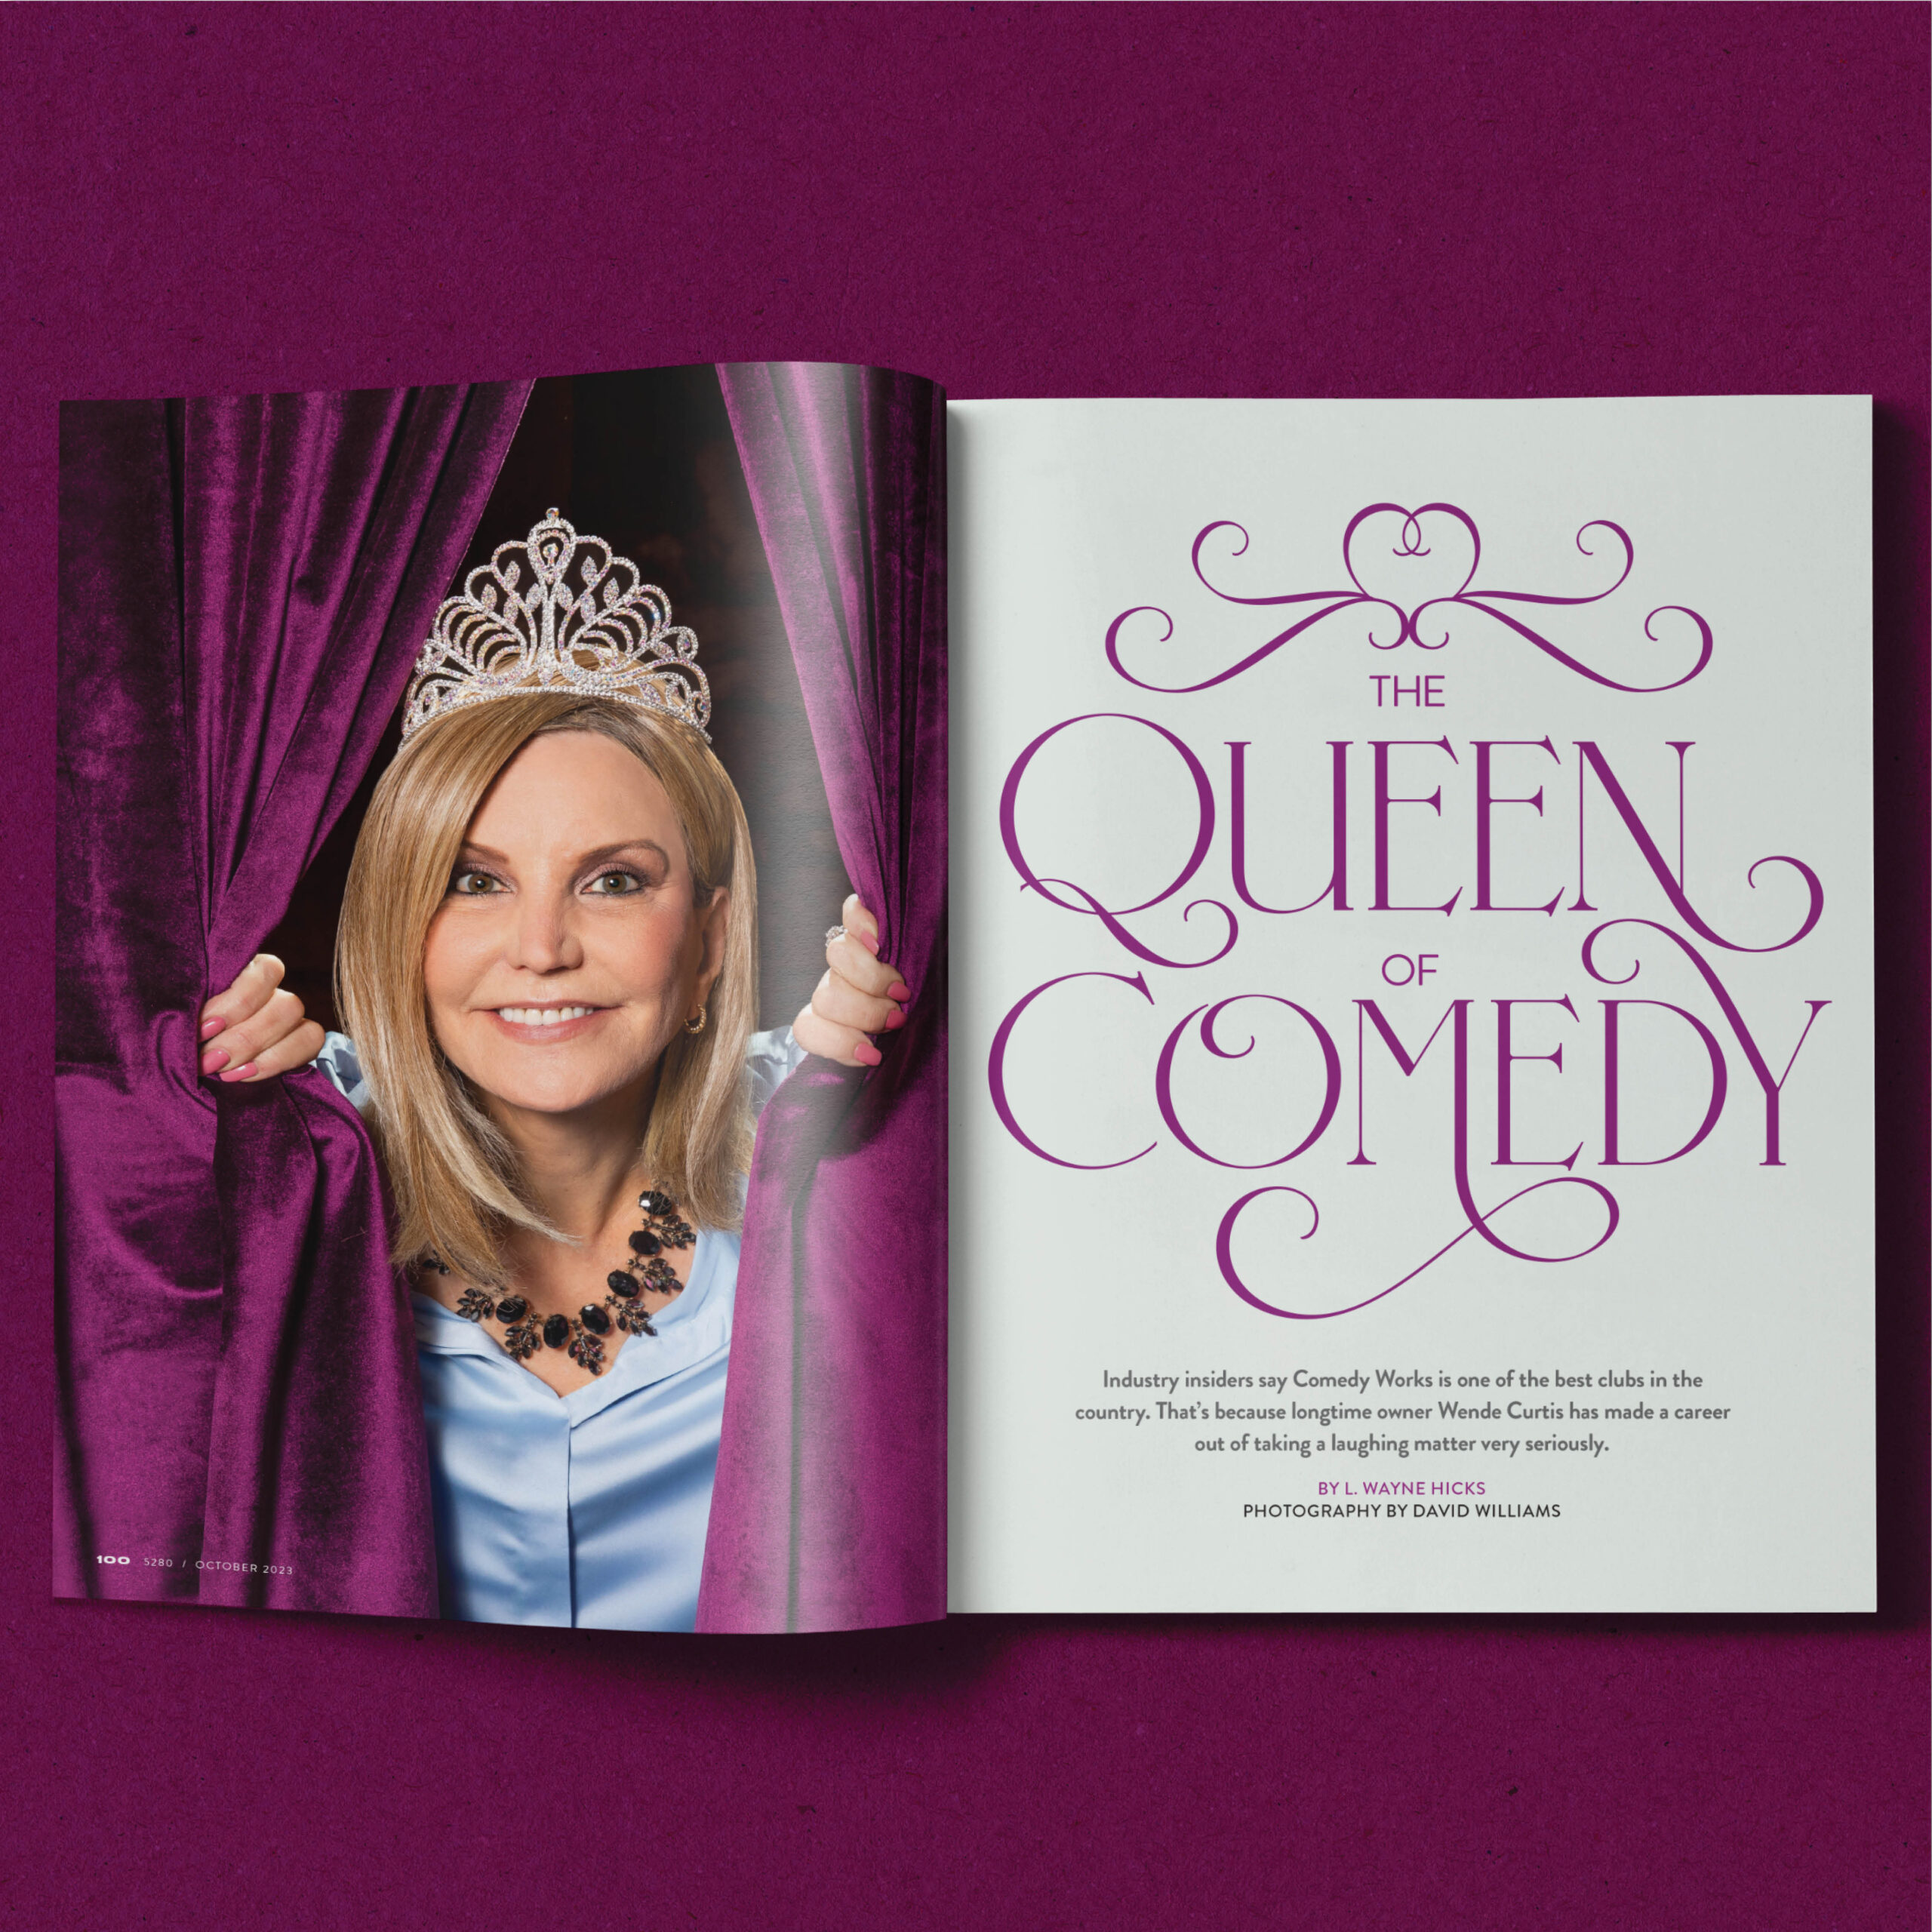 The Queen of Comedy